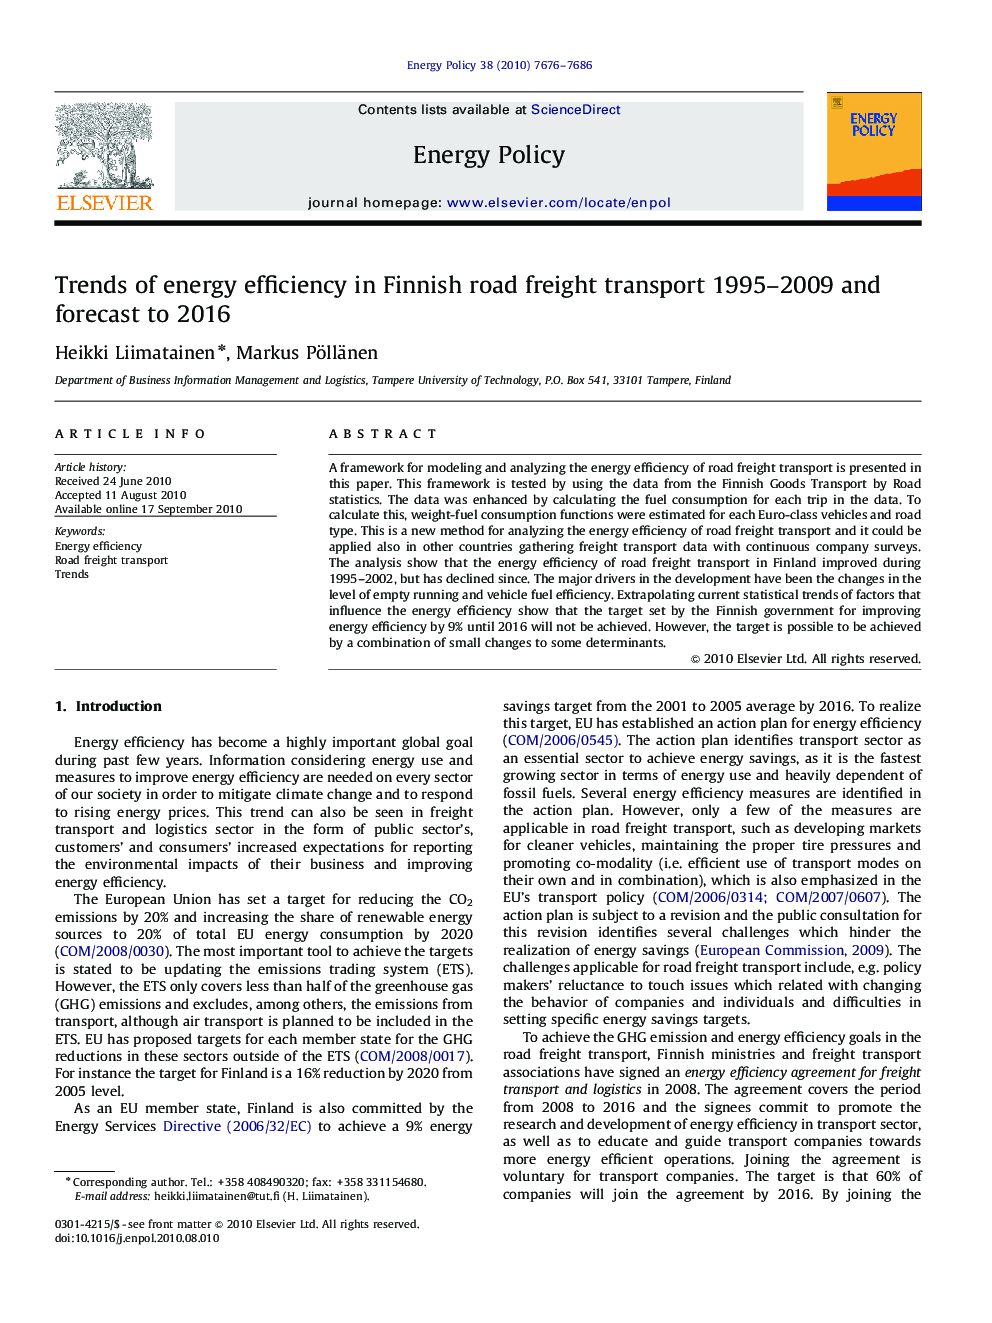 Trends of energy efficiency in Finnish road freight transport 1995–2009 and forecast to 2016